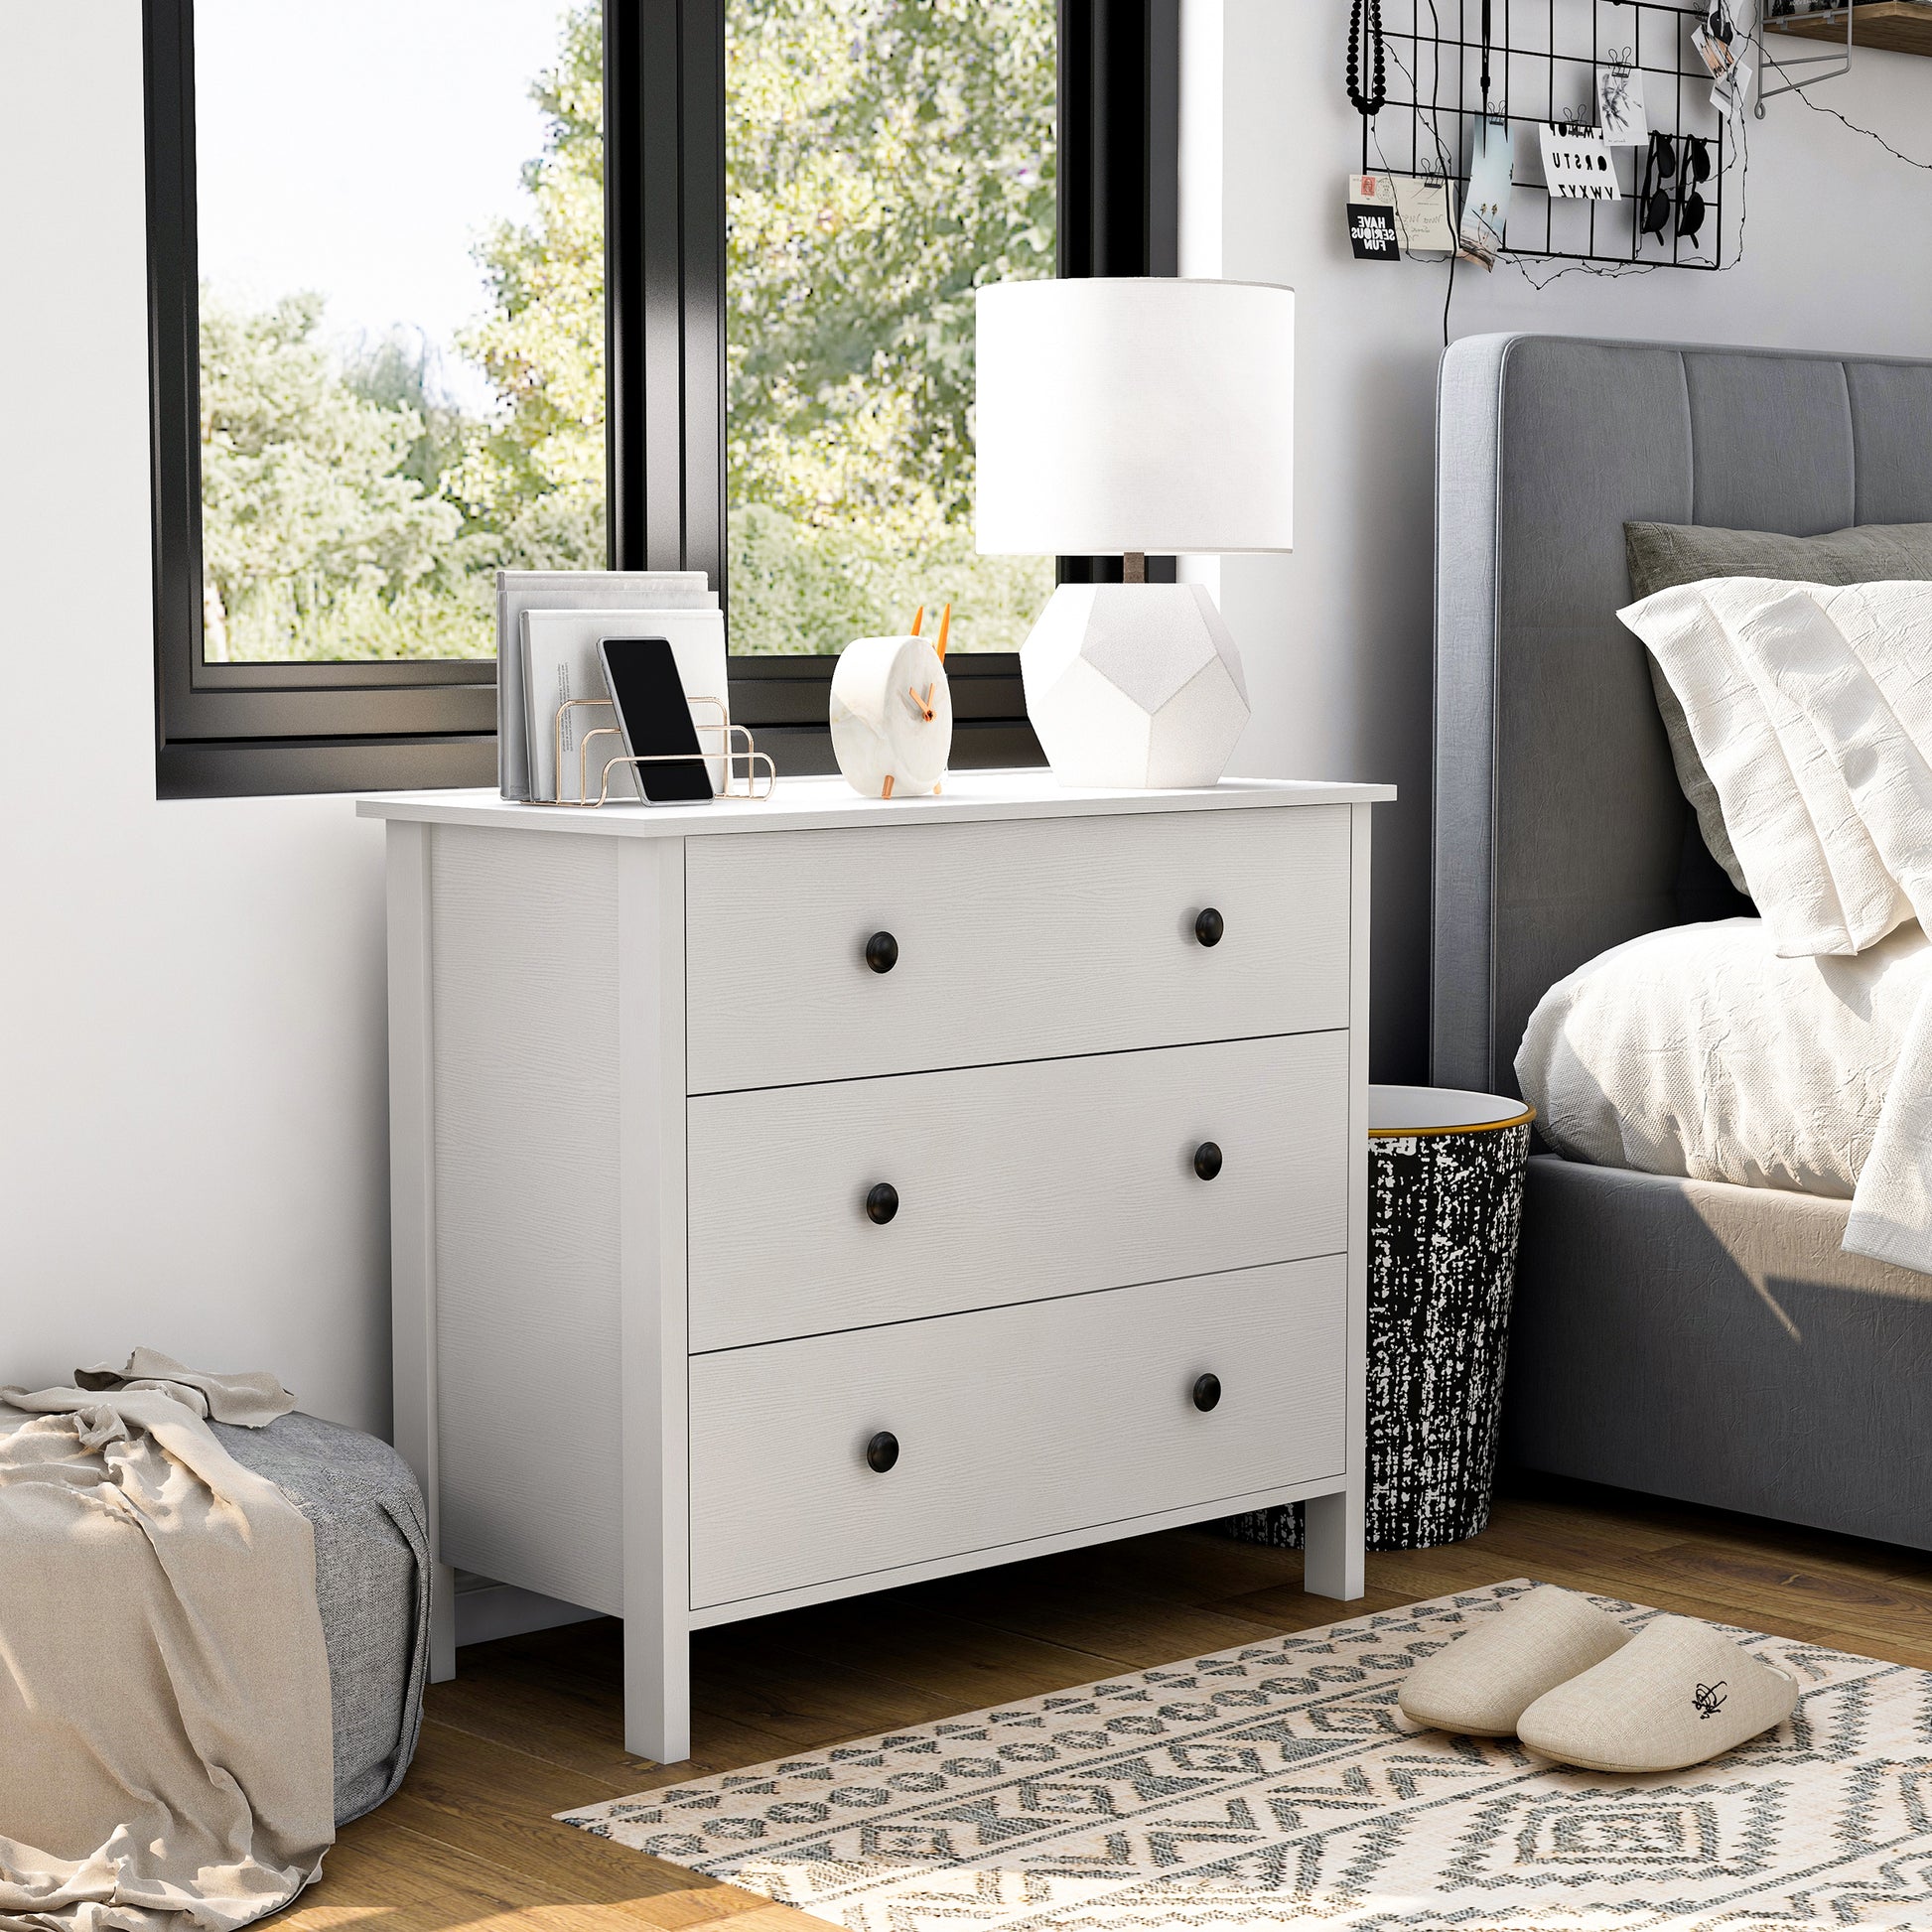 Right angled transitional white three-drawer youth dresser in a bedroom with accessories